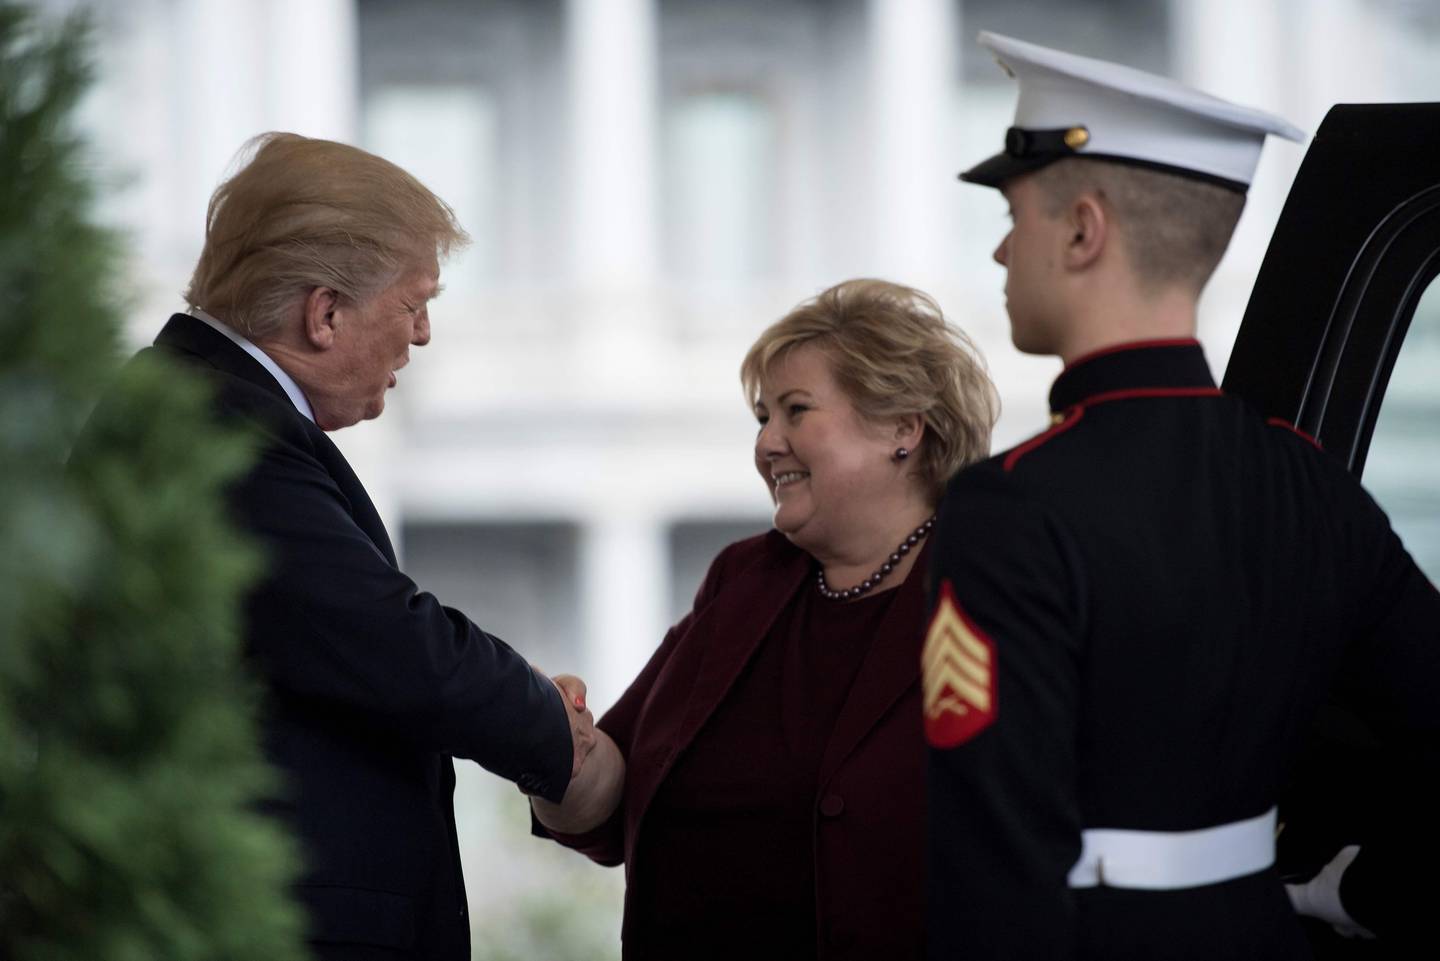 US President Donald Trump (L) welcomes Prime Minister of Norway Erna Solberg to the White House in Washington, DC on January 10, 2018 in Washington, DC.       / AFP PHOTO / Brendan Smialowski